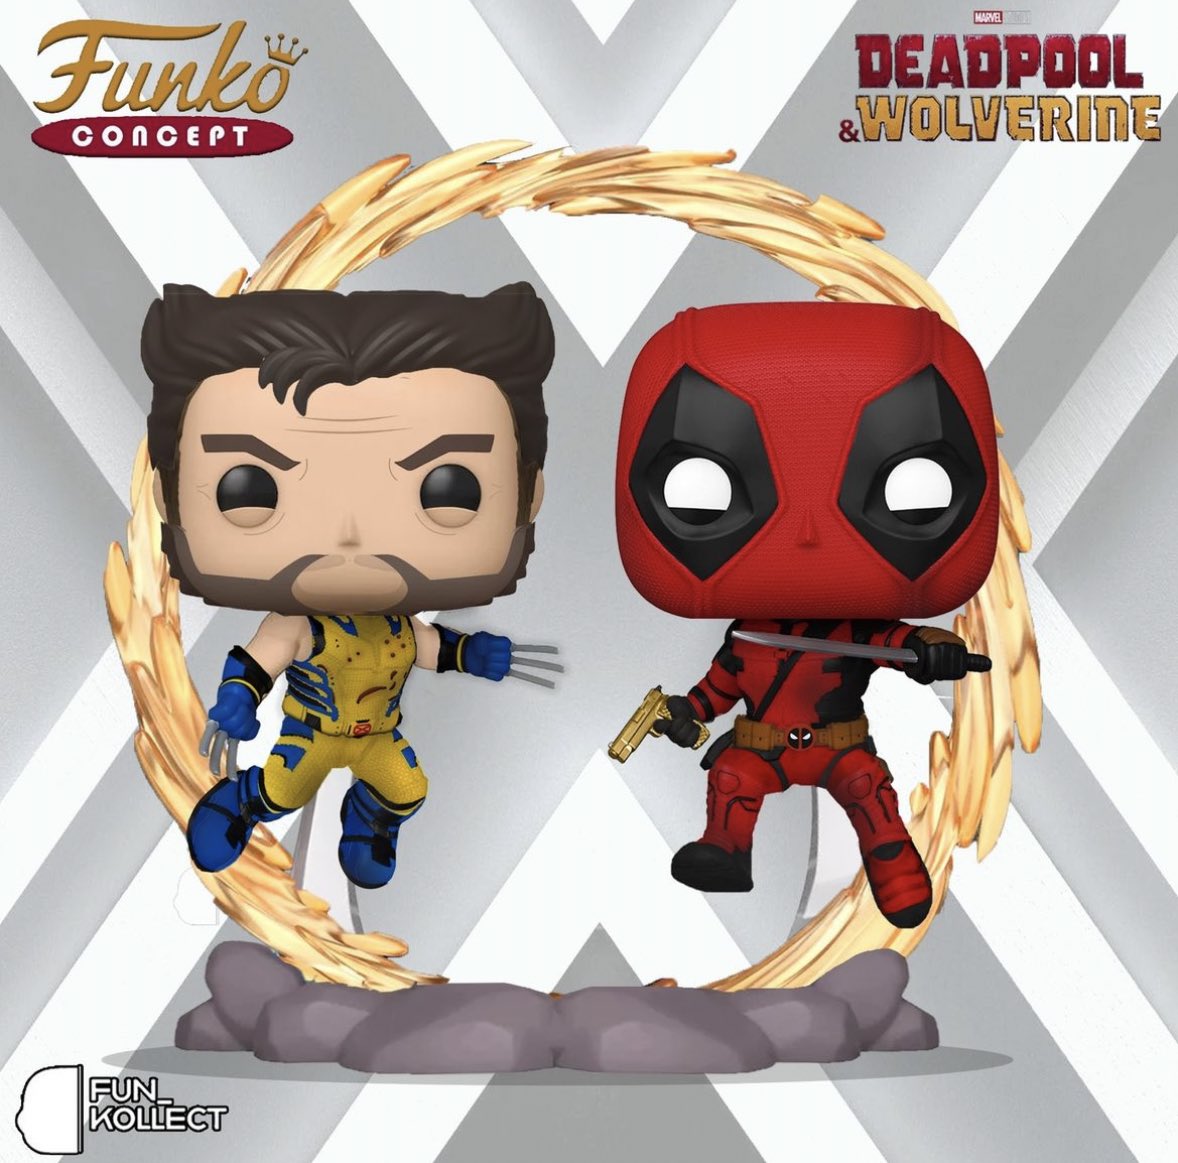 Custom time! Check out this awesome Deadpool X Wolverine Funko POP! Concept ~ hopefully they release a bunch of fun ones for this film! Created by @fun_kollect ~ #Deadpool #Wolverine #FPN #FunkoPOPNews #Funko #POP #POPVinyl #FunkoPOP #FunkoSoda